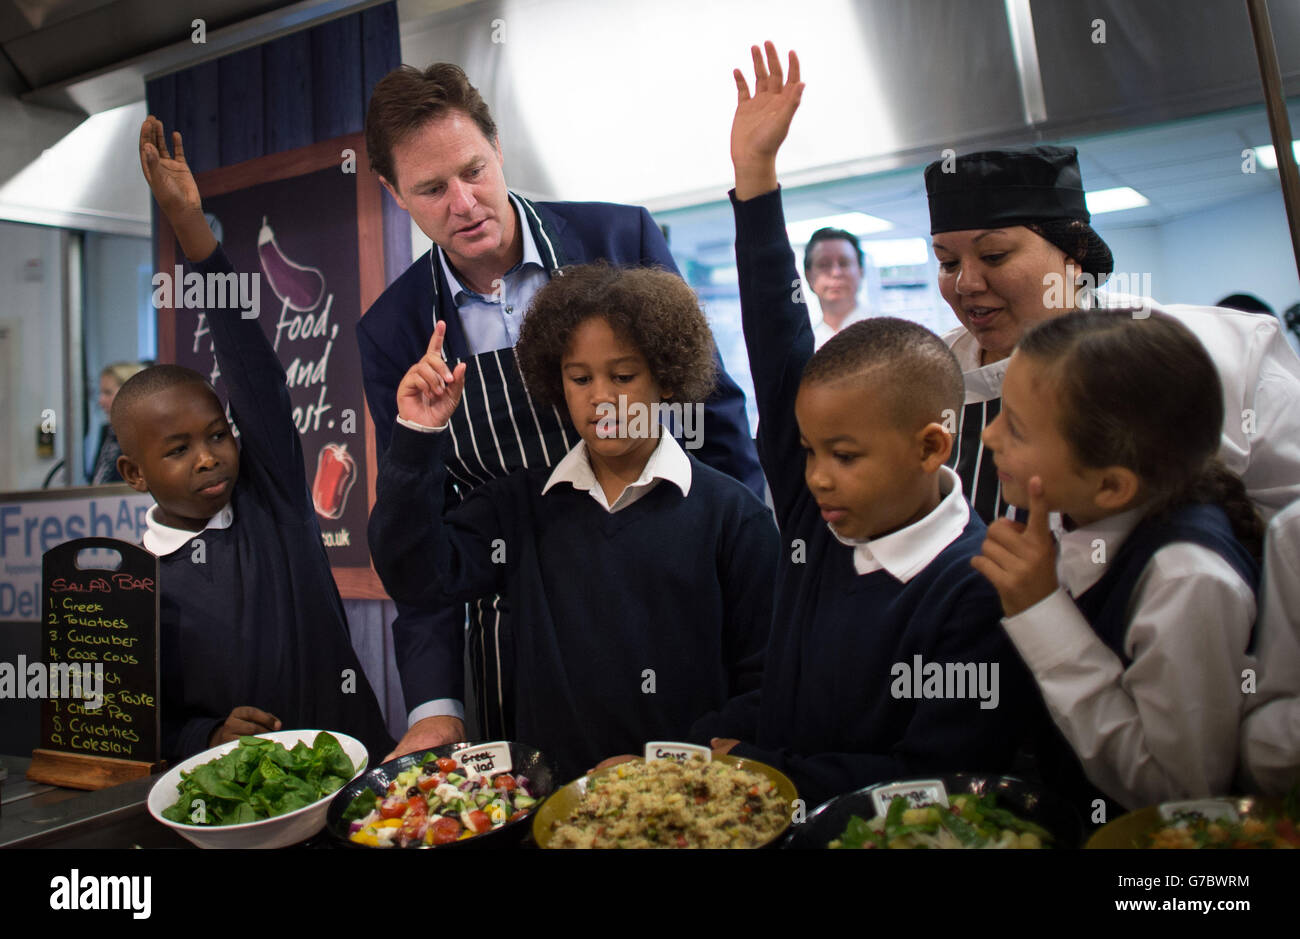 Deputy Prime Minister Nick Clegg meets pupils at Clapham Manor Primary School in south west London, where he officially launched the government's scheme to provide 5-7 year olds with free school meals. Stock Photo